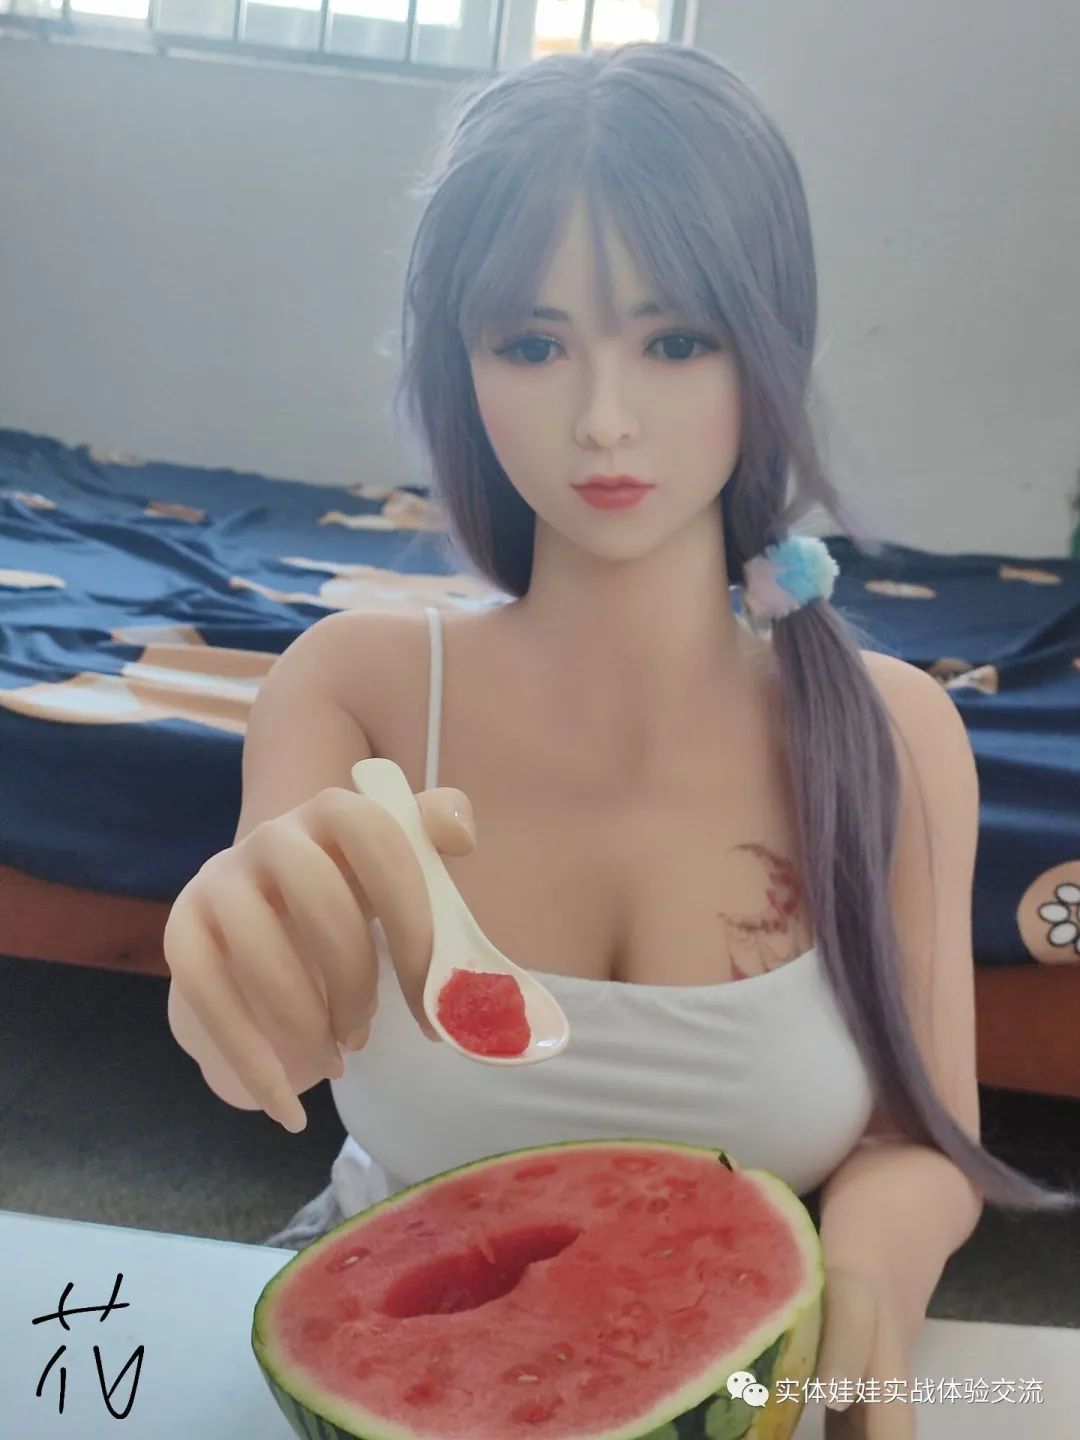 About the regular scammer routine of physical dolls!